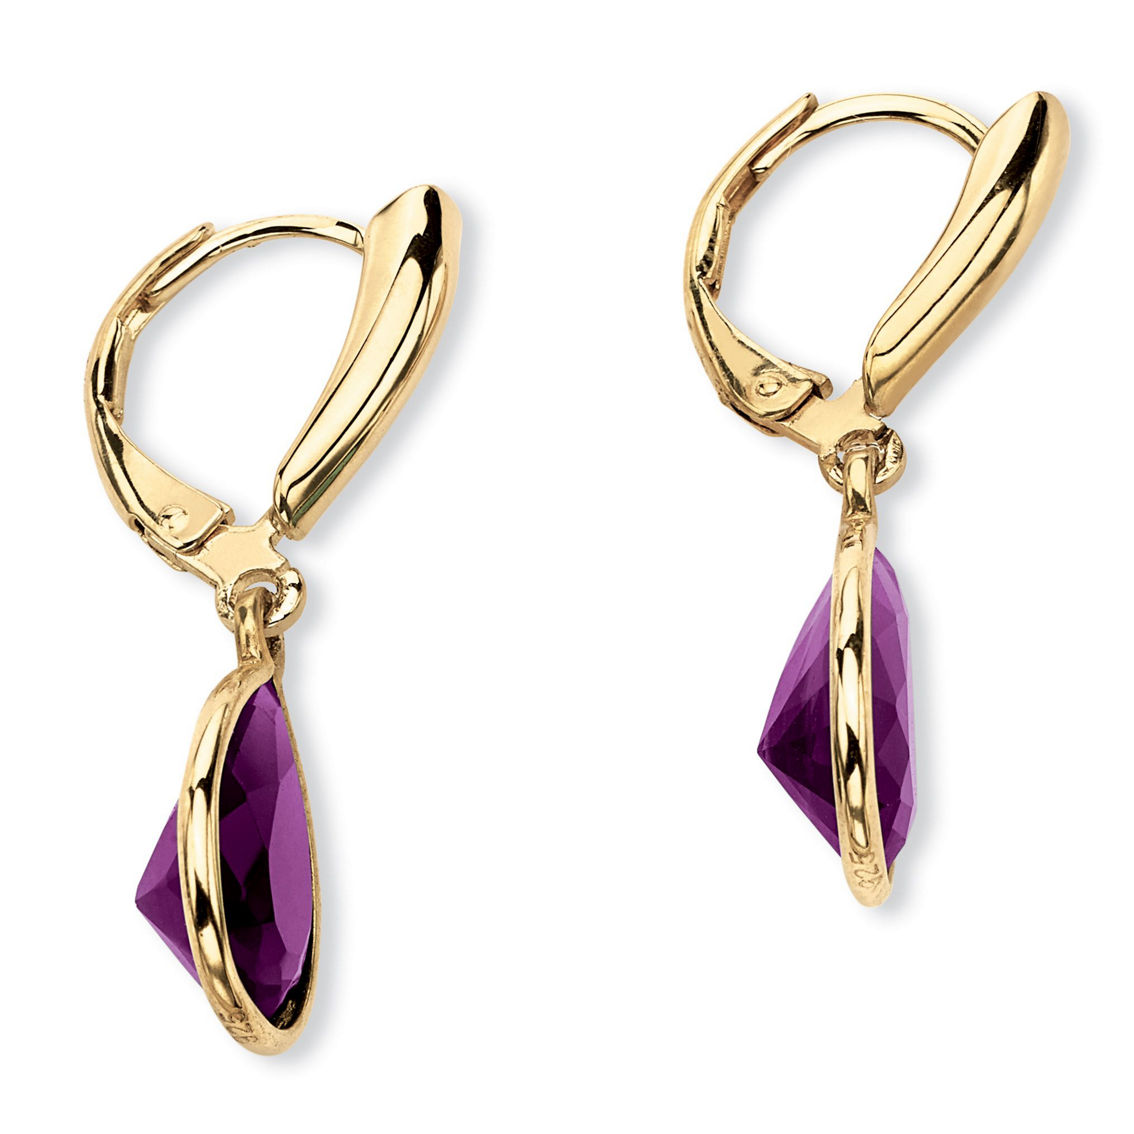 Pear-Cut Simulated Birthstone Drop Earrings in 14k Gold-plated Sterling Silver - Image 2 of 4